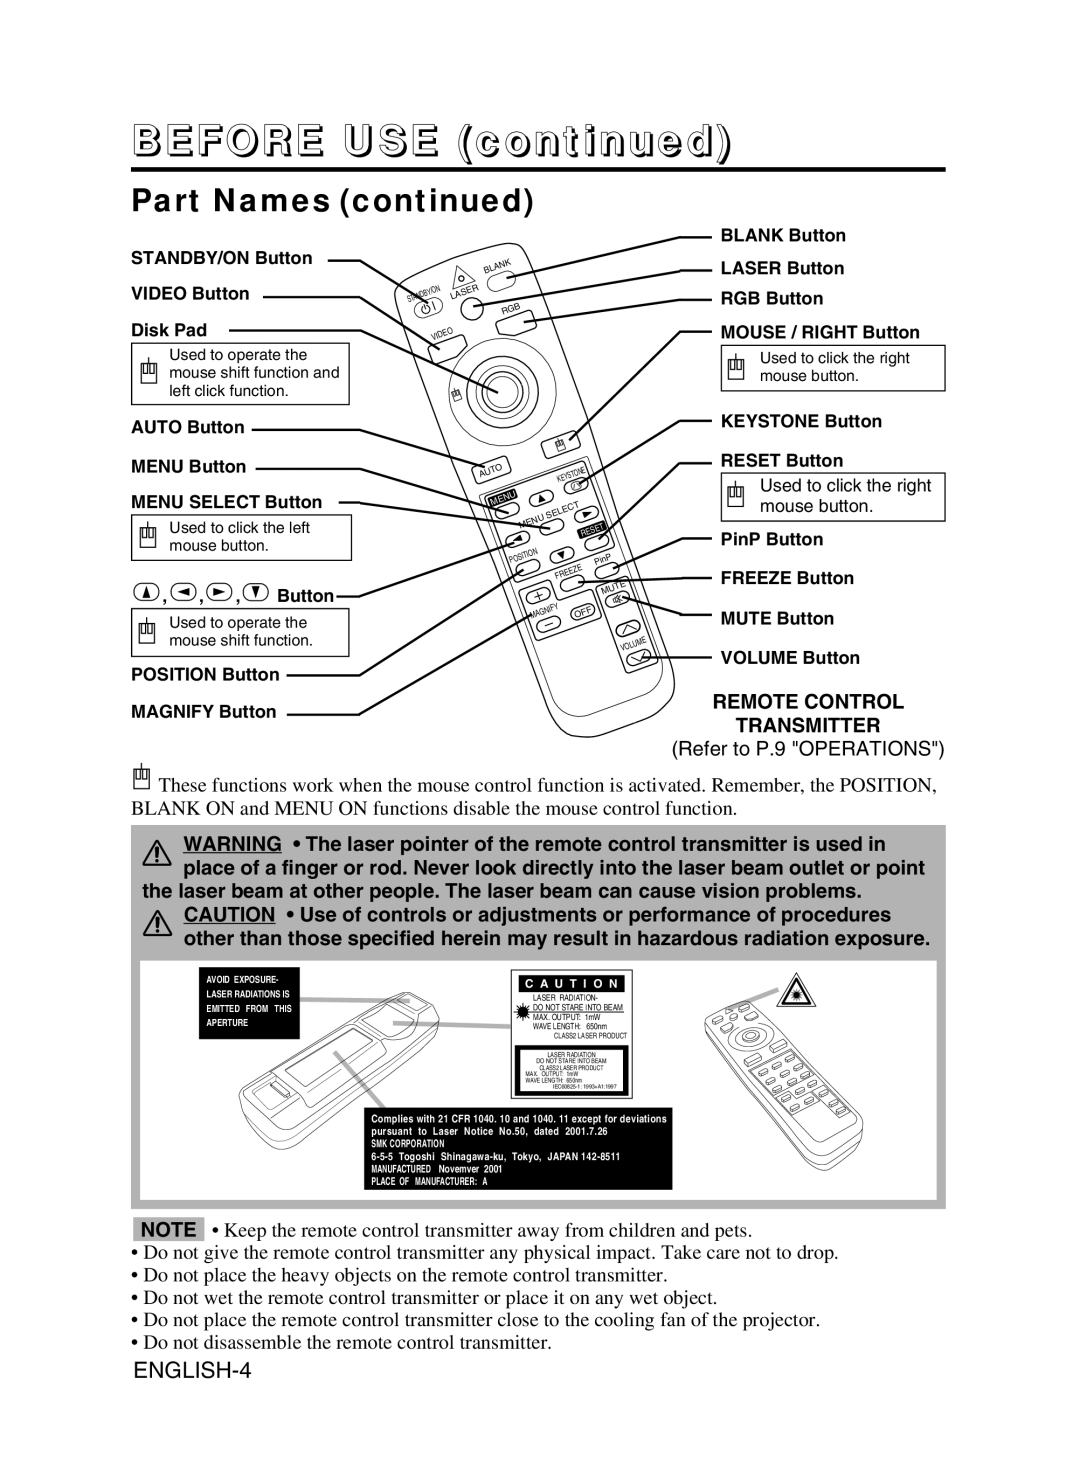 BOXLIGHT CP-775I user manual Part Names continued, ENGLISH-4, BEFORE USE continued 